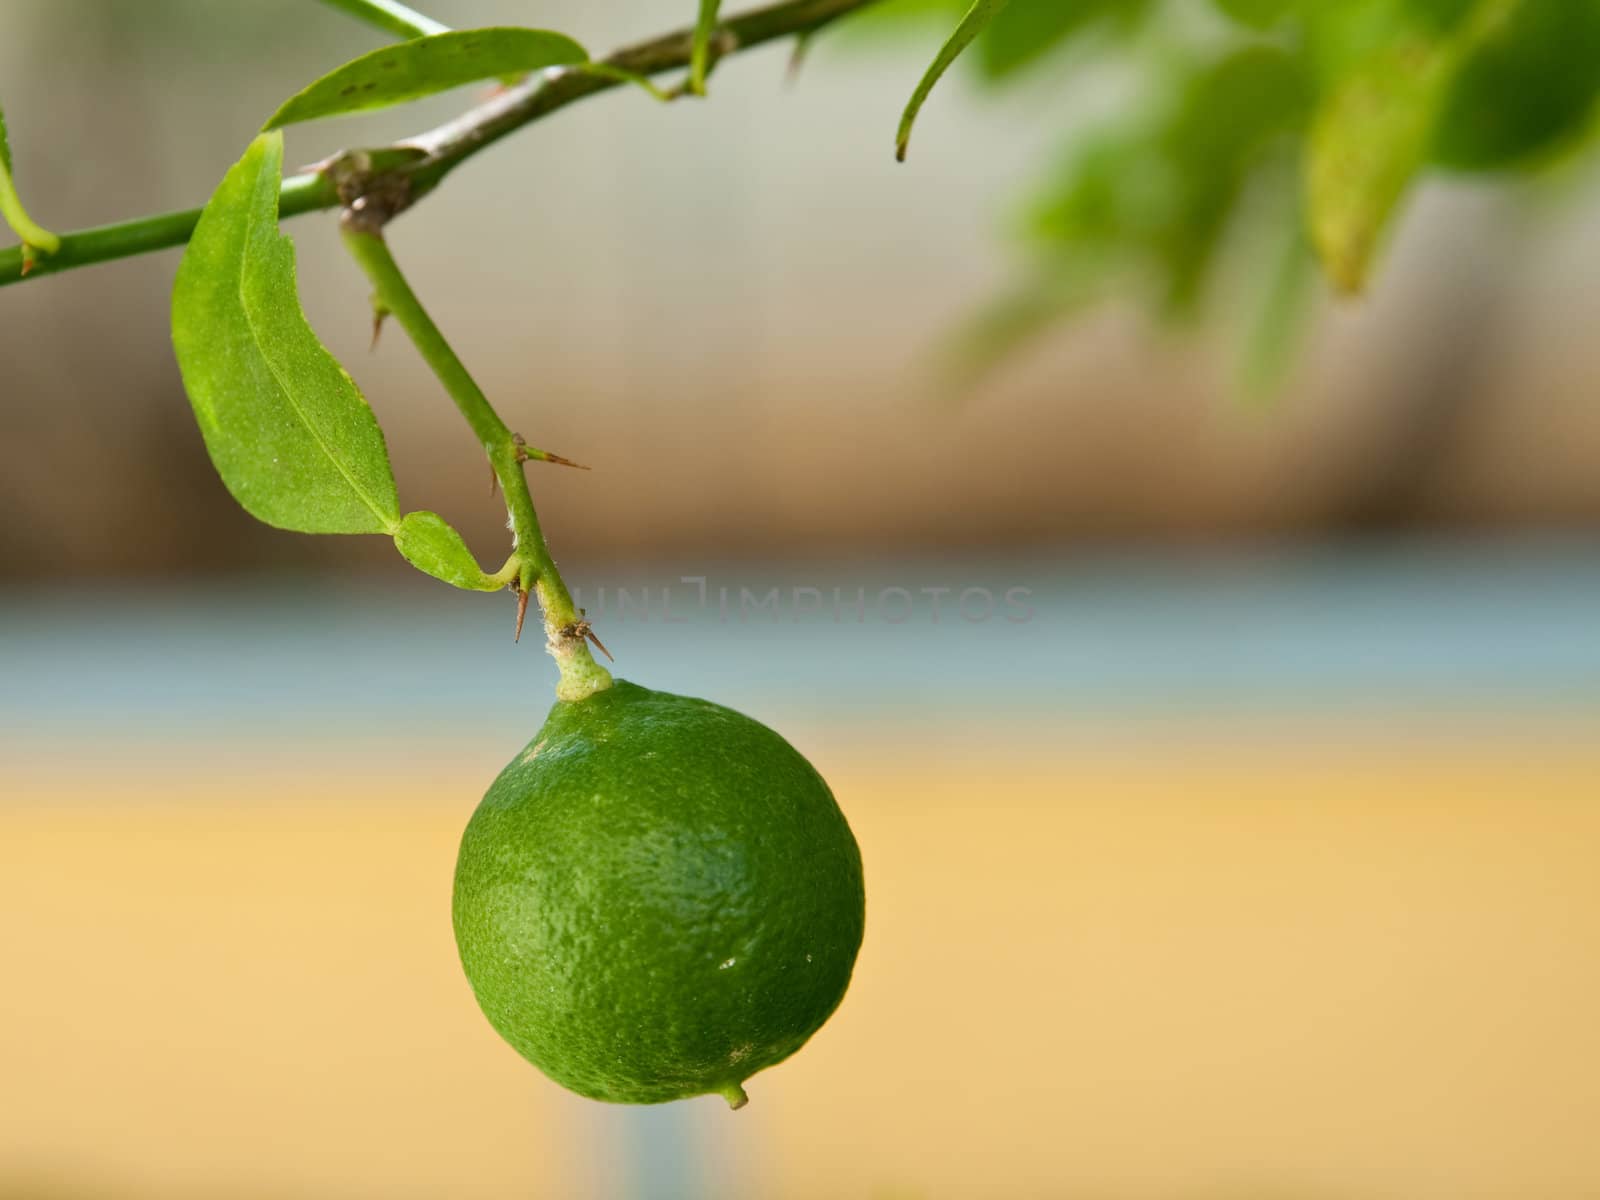 The picture of the lime, growing in the yard